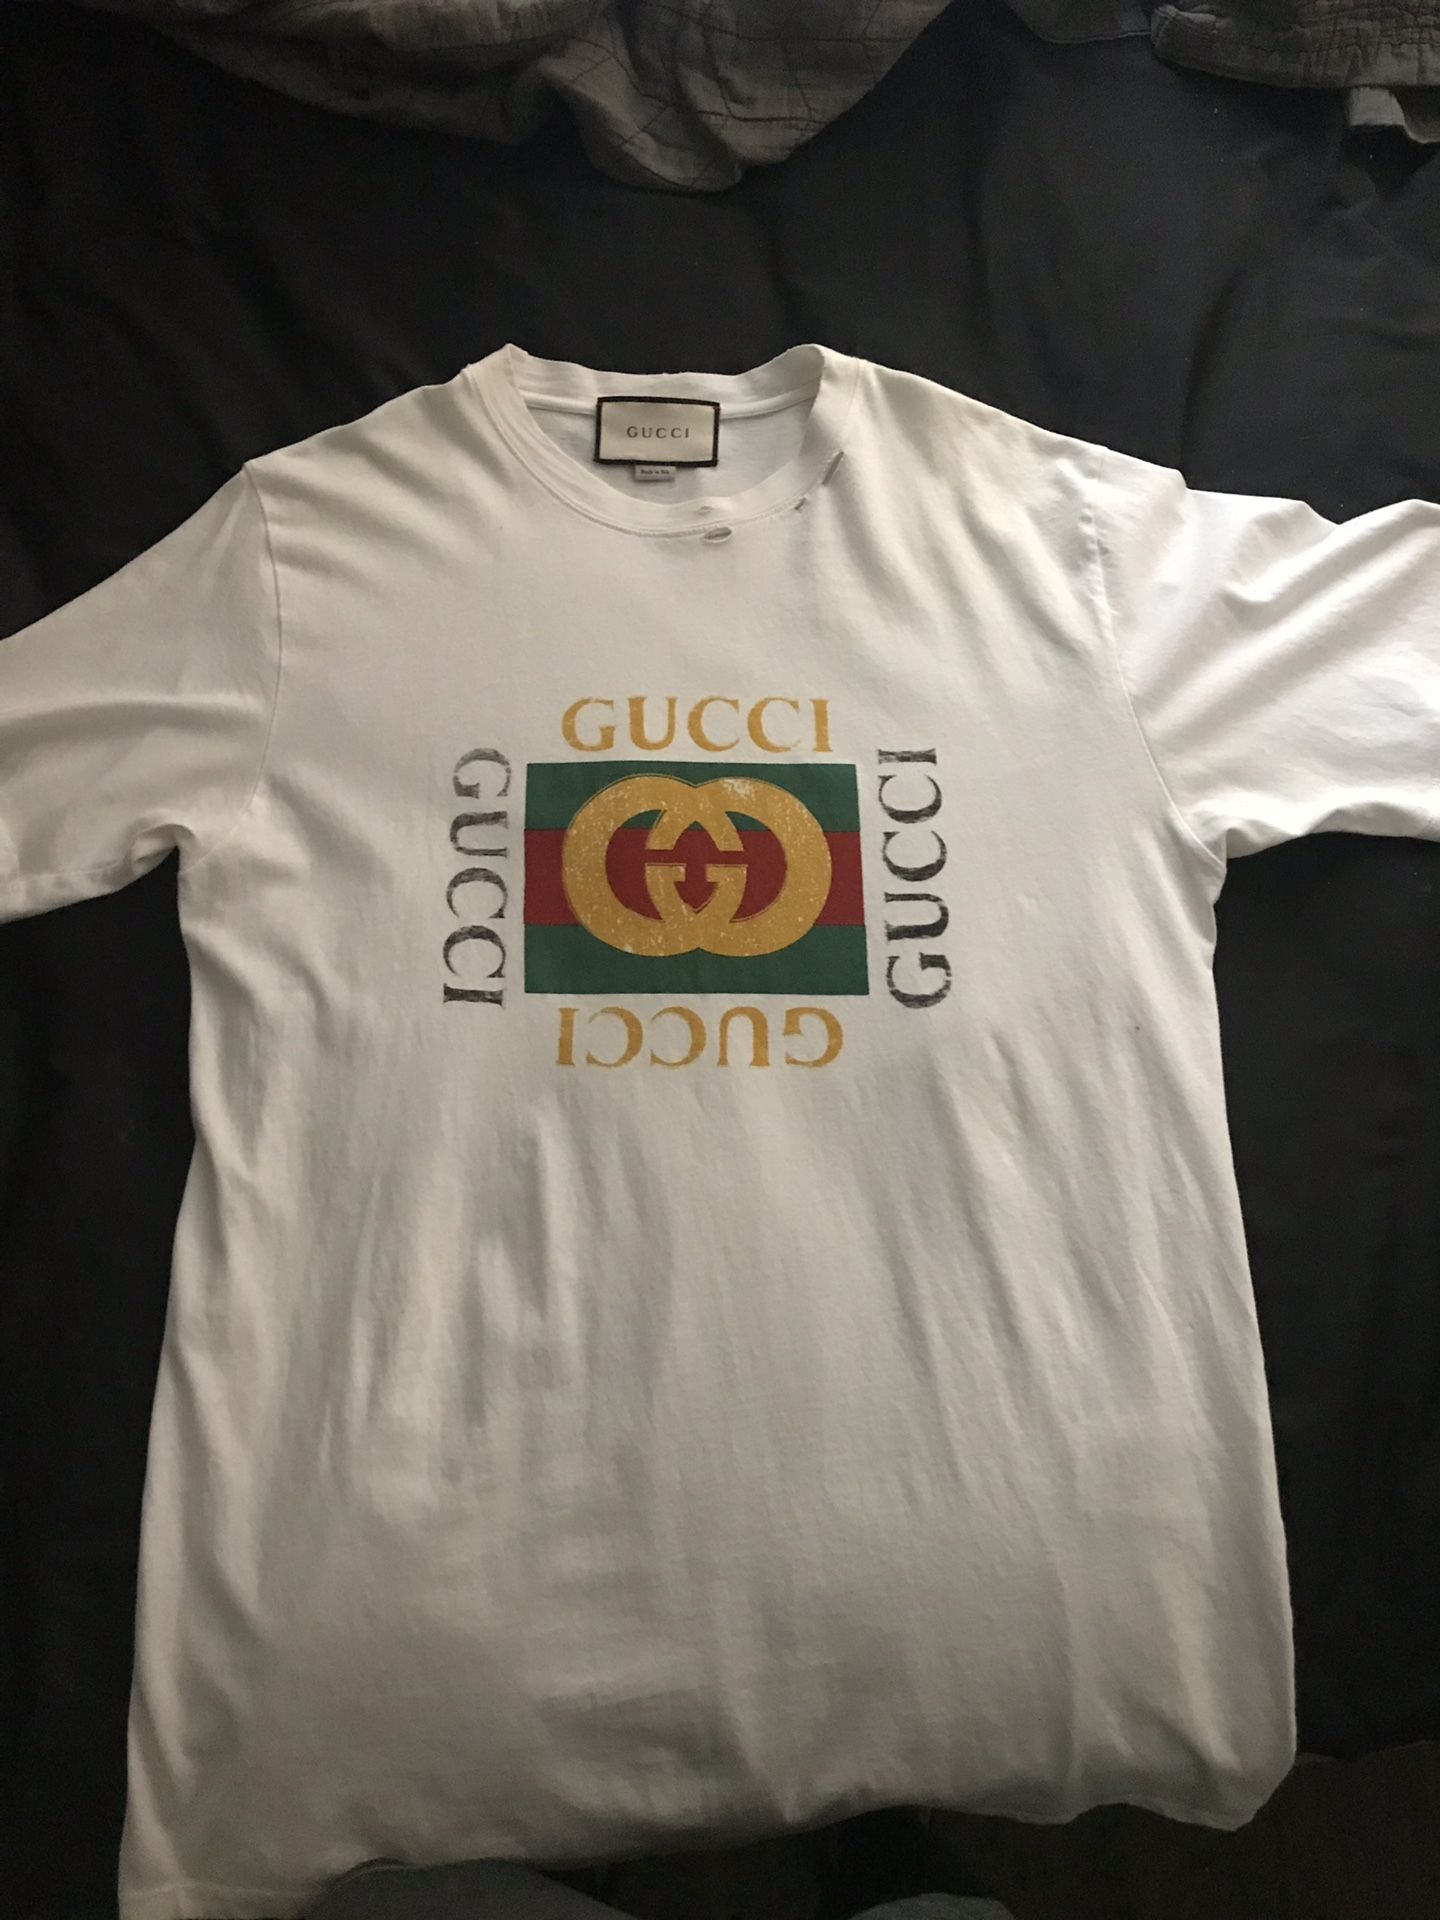 Gucci distressed t-shirt size Large